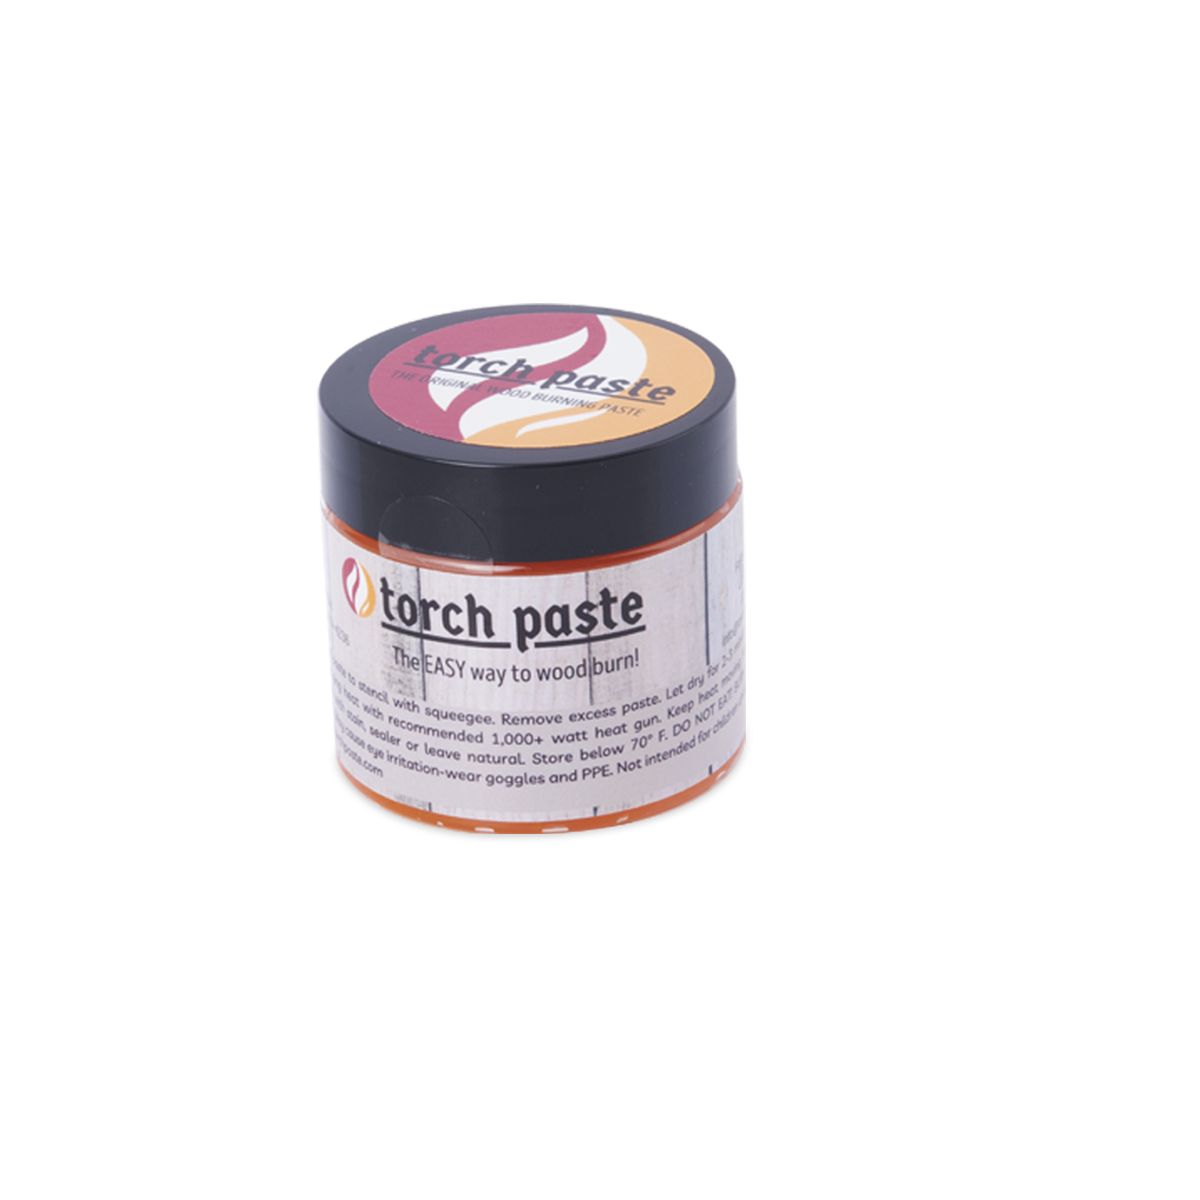 Torch Paste - The Original Woodburning Paste, Shop Today. Get it Tomorrow!